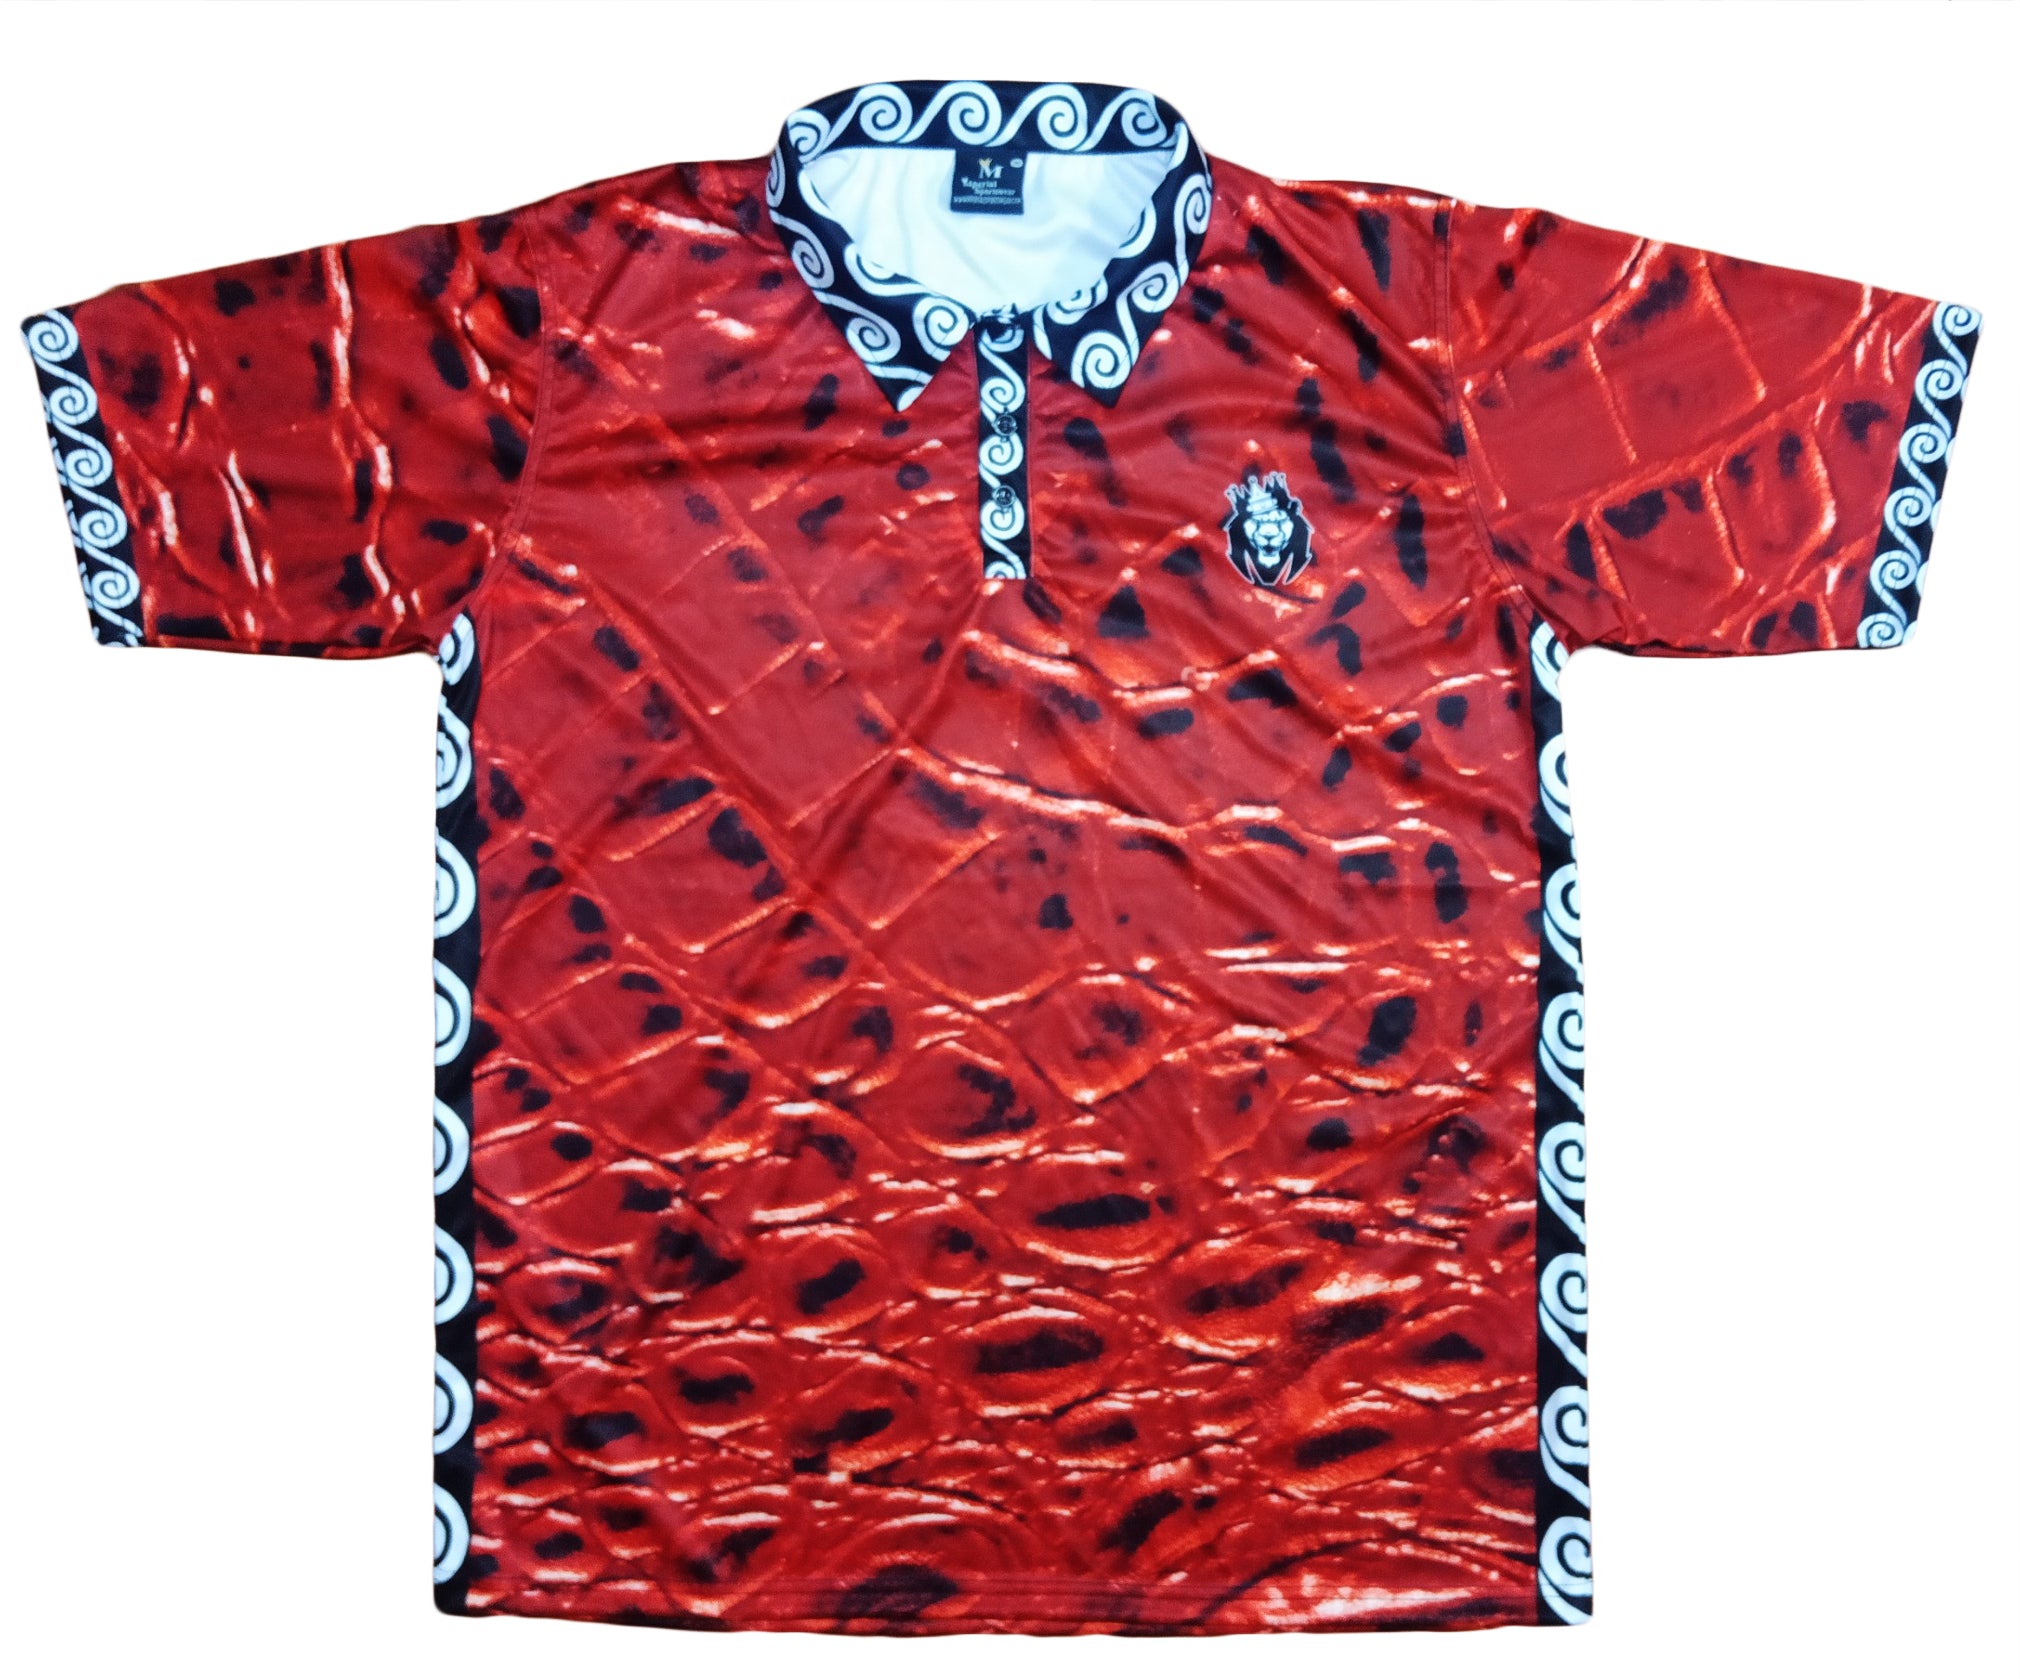 Mperial Red Croc Polo